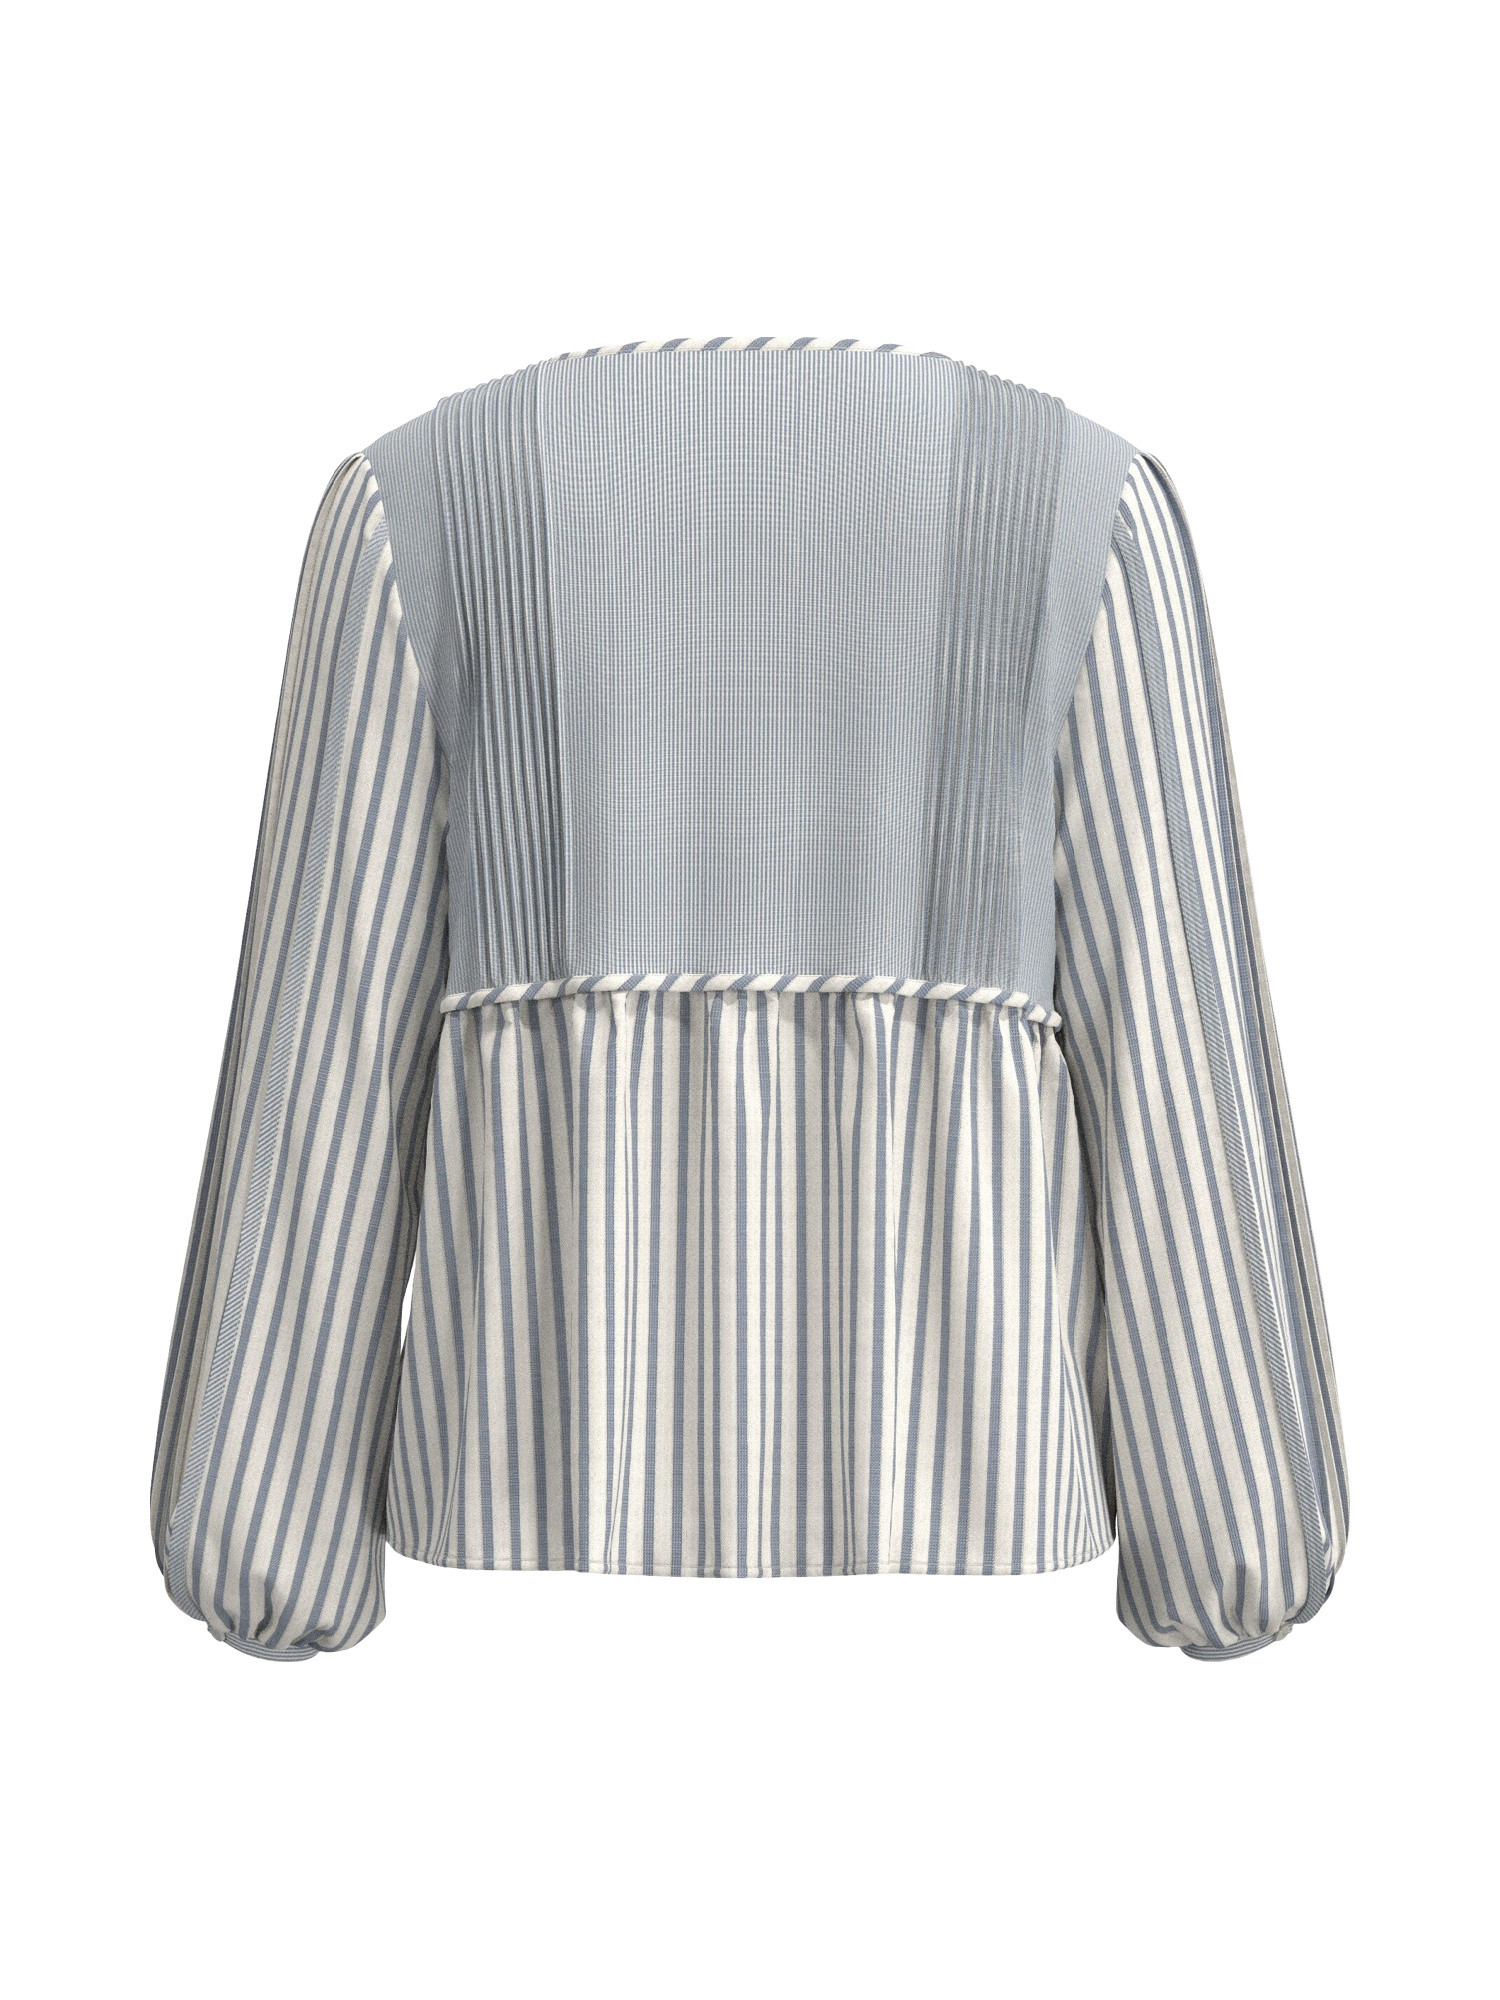 Pepe Jeans - Striped blouse, Light Blue, large image number 1